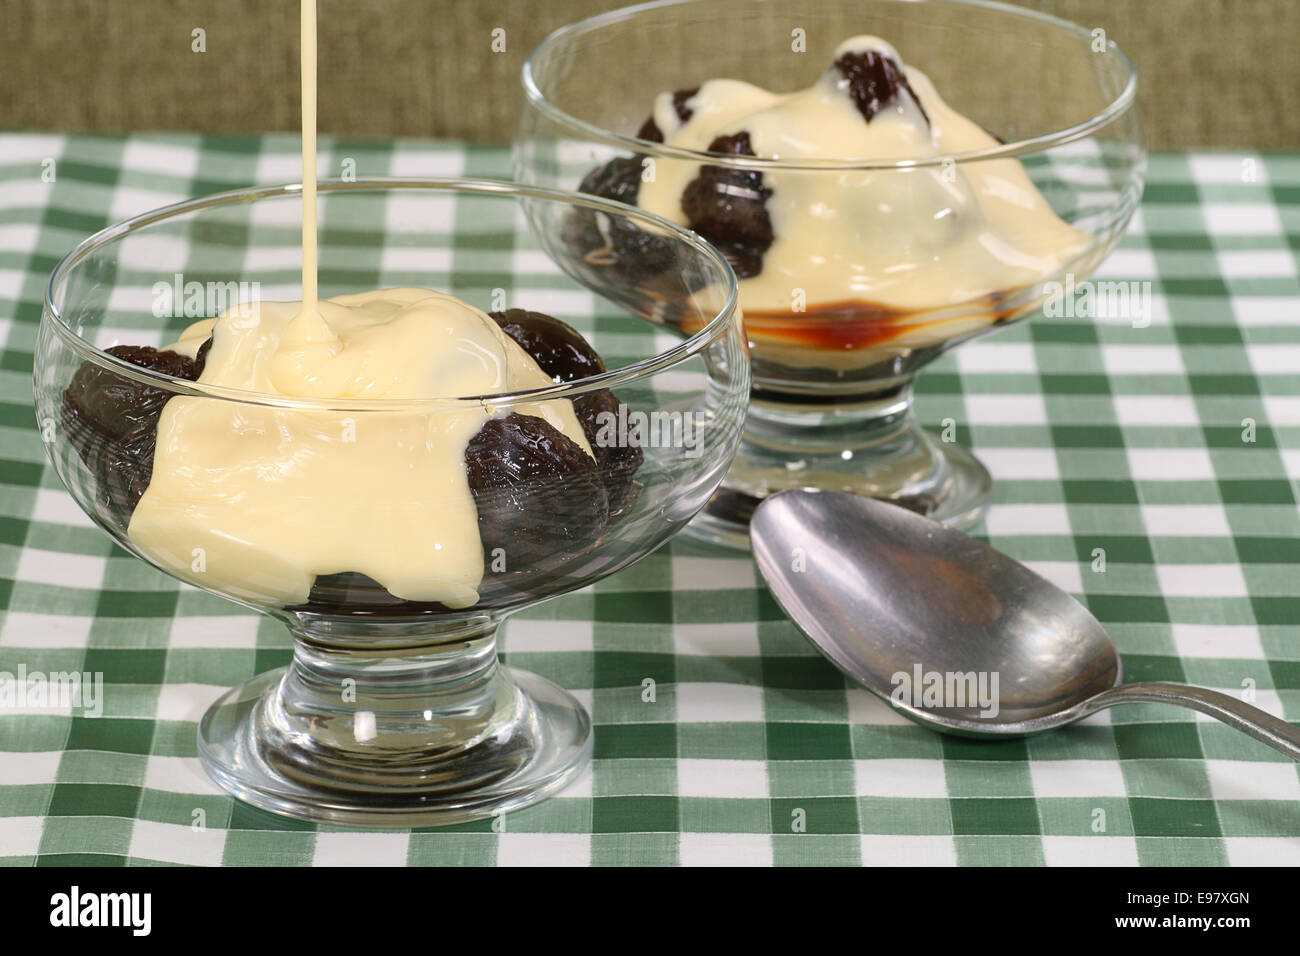 prunes and custard in a glass bowl Stock Photo